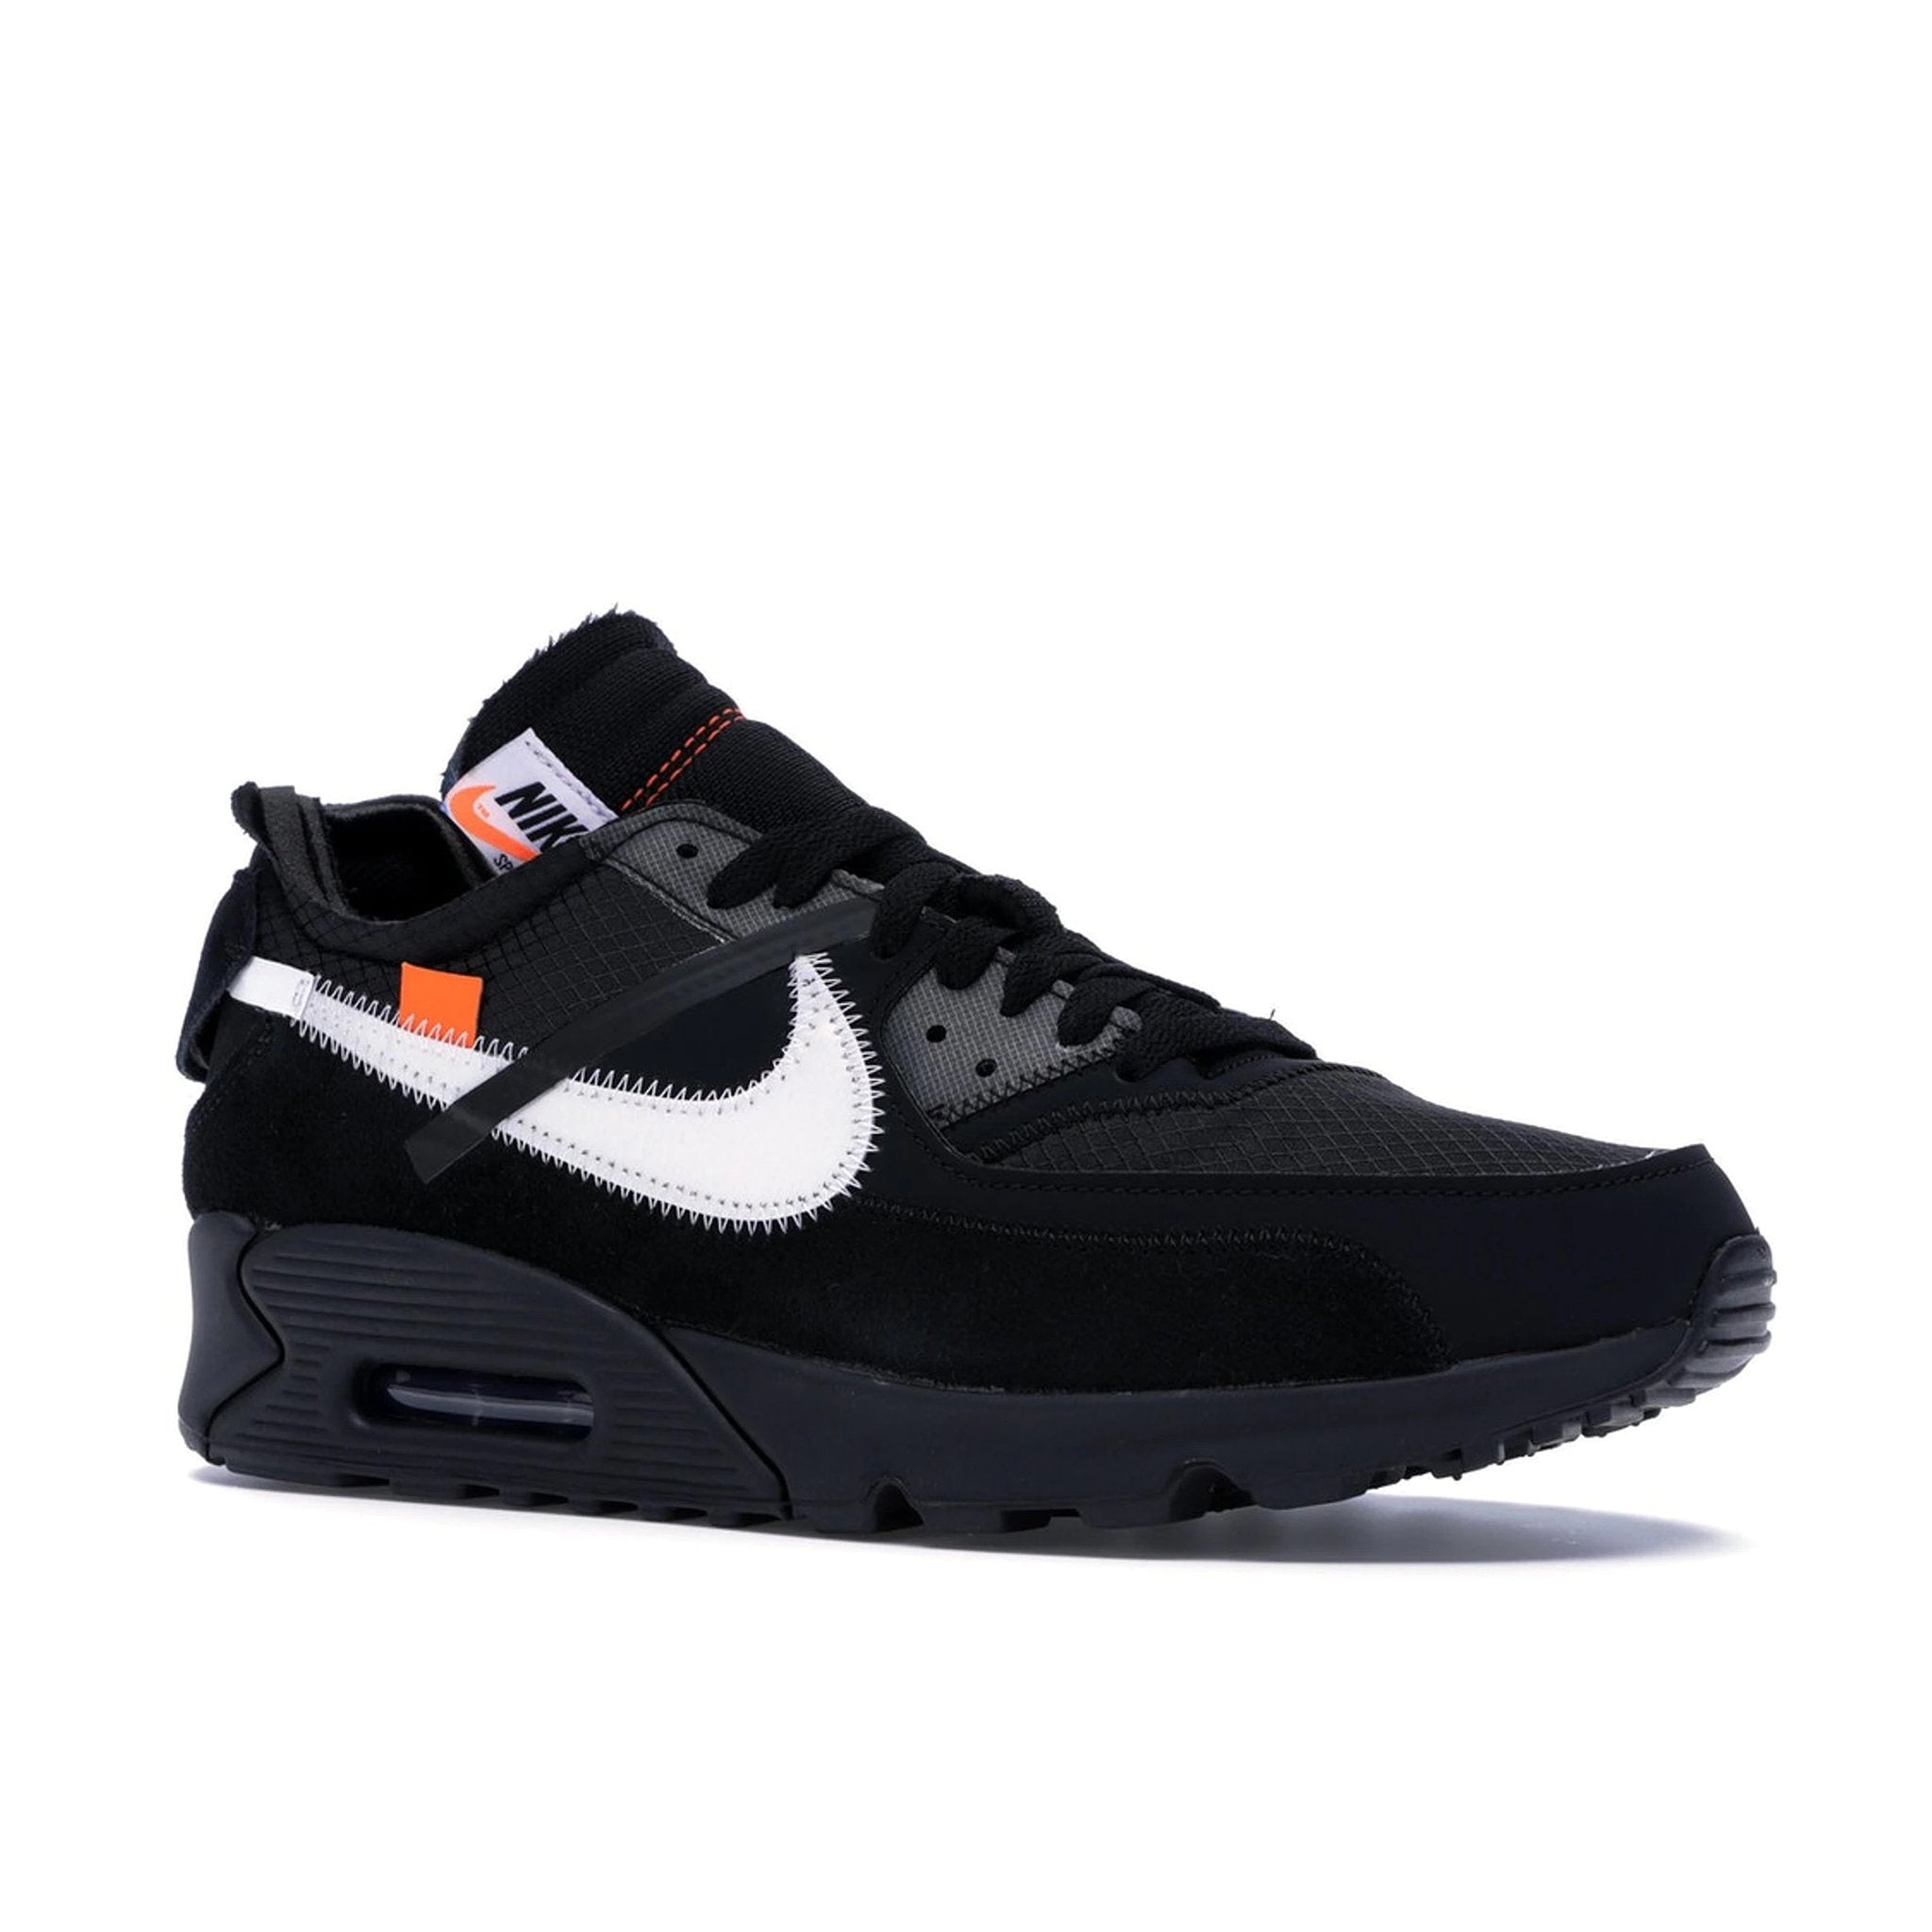 off white air max 90 snkrs